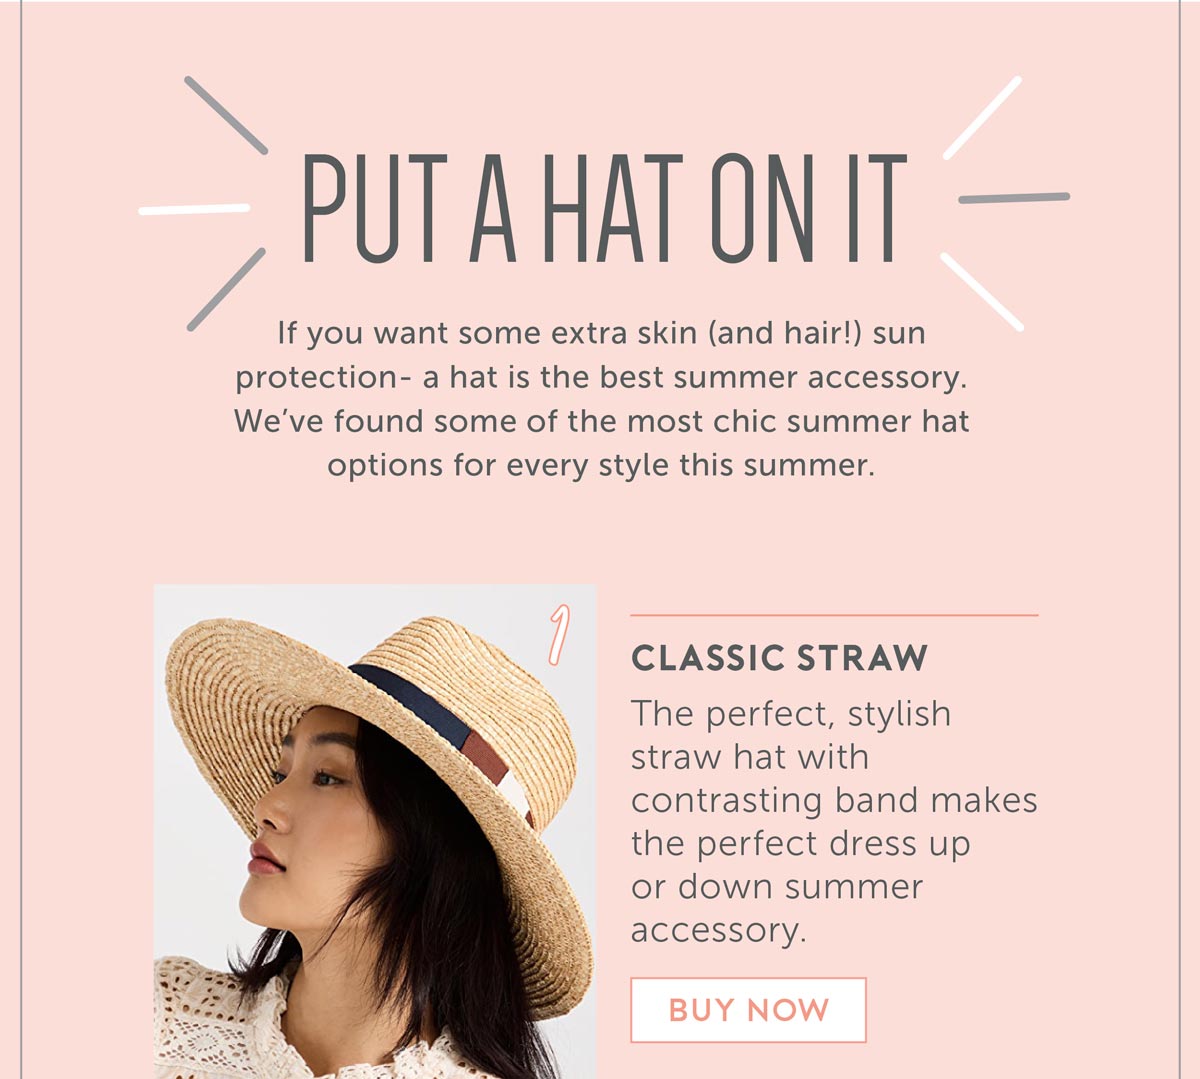 Put A Hat On It If you want some extra skin (and hair!) sun protection- a hat is the best summer accessory. We’ve found some of the most chic summer hat options for every style this summer. 1.Classic straw. The perfect, stylish straw hat with contrasting band makes the perfect dress up or down summer accessory.